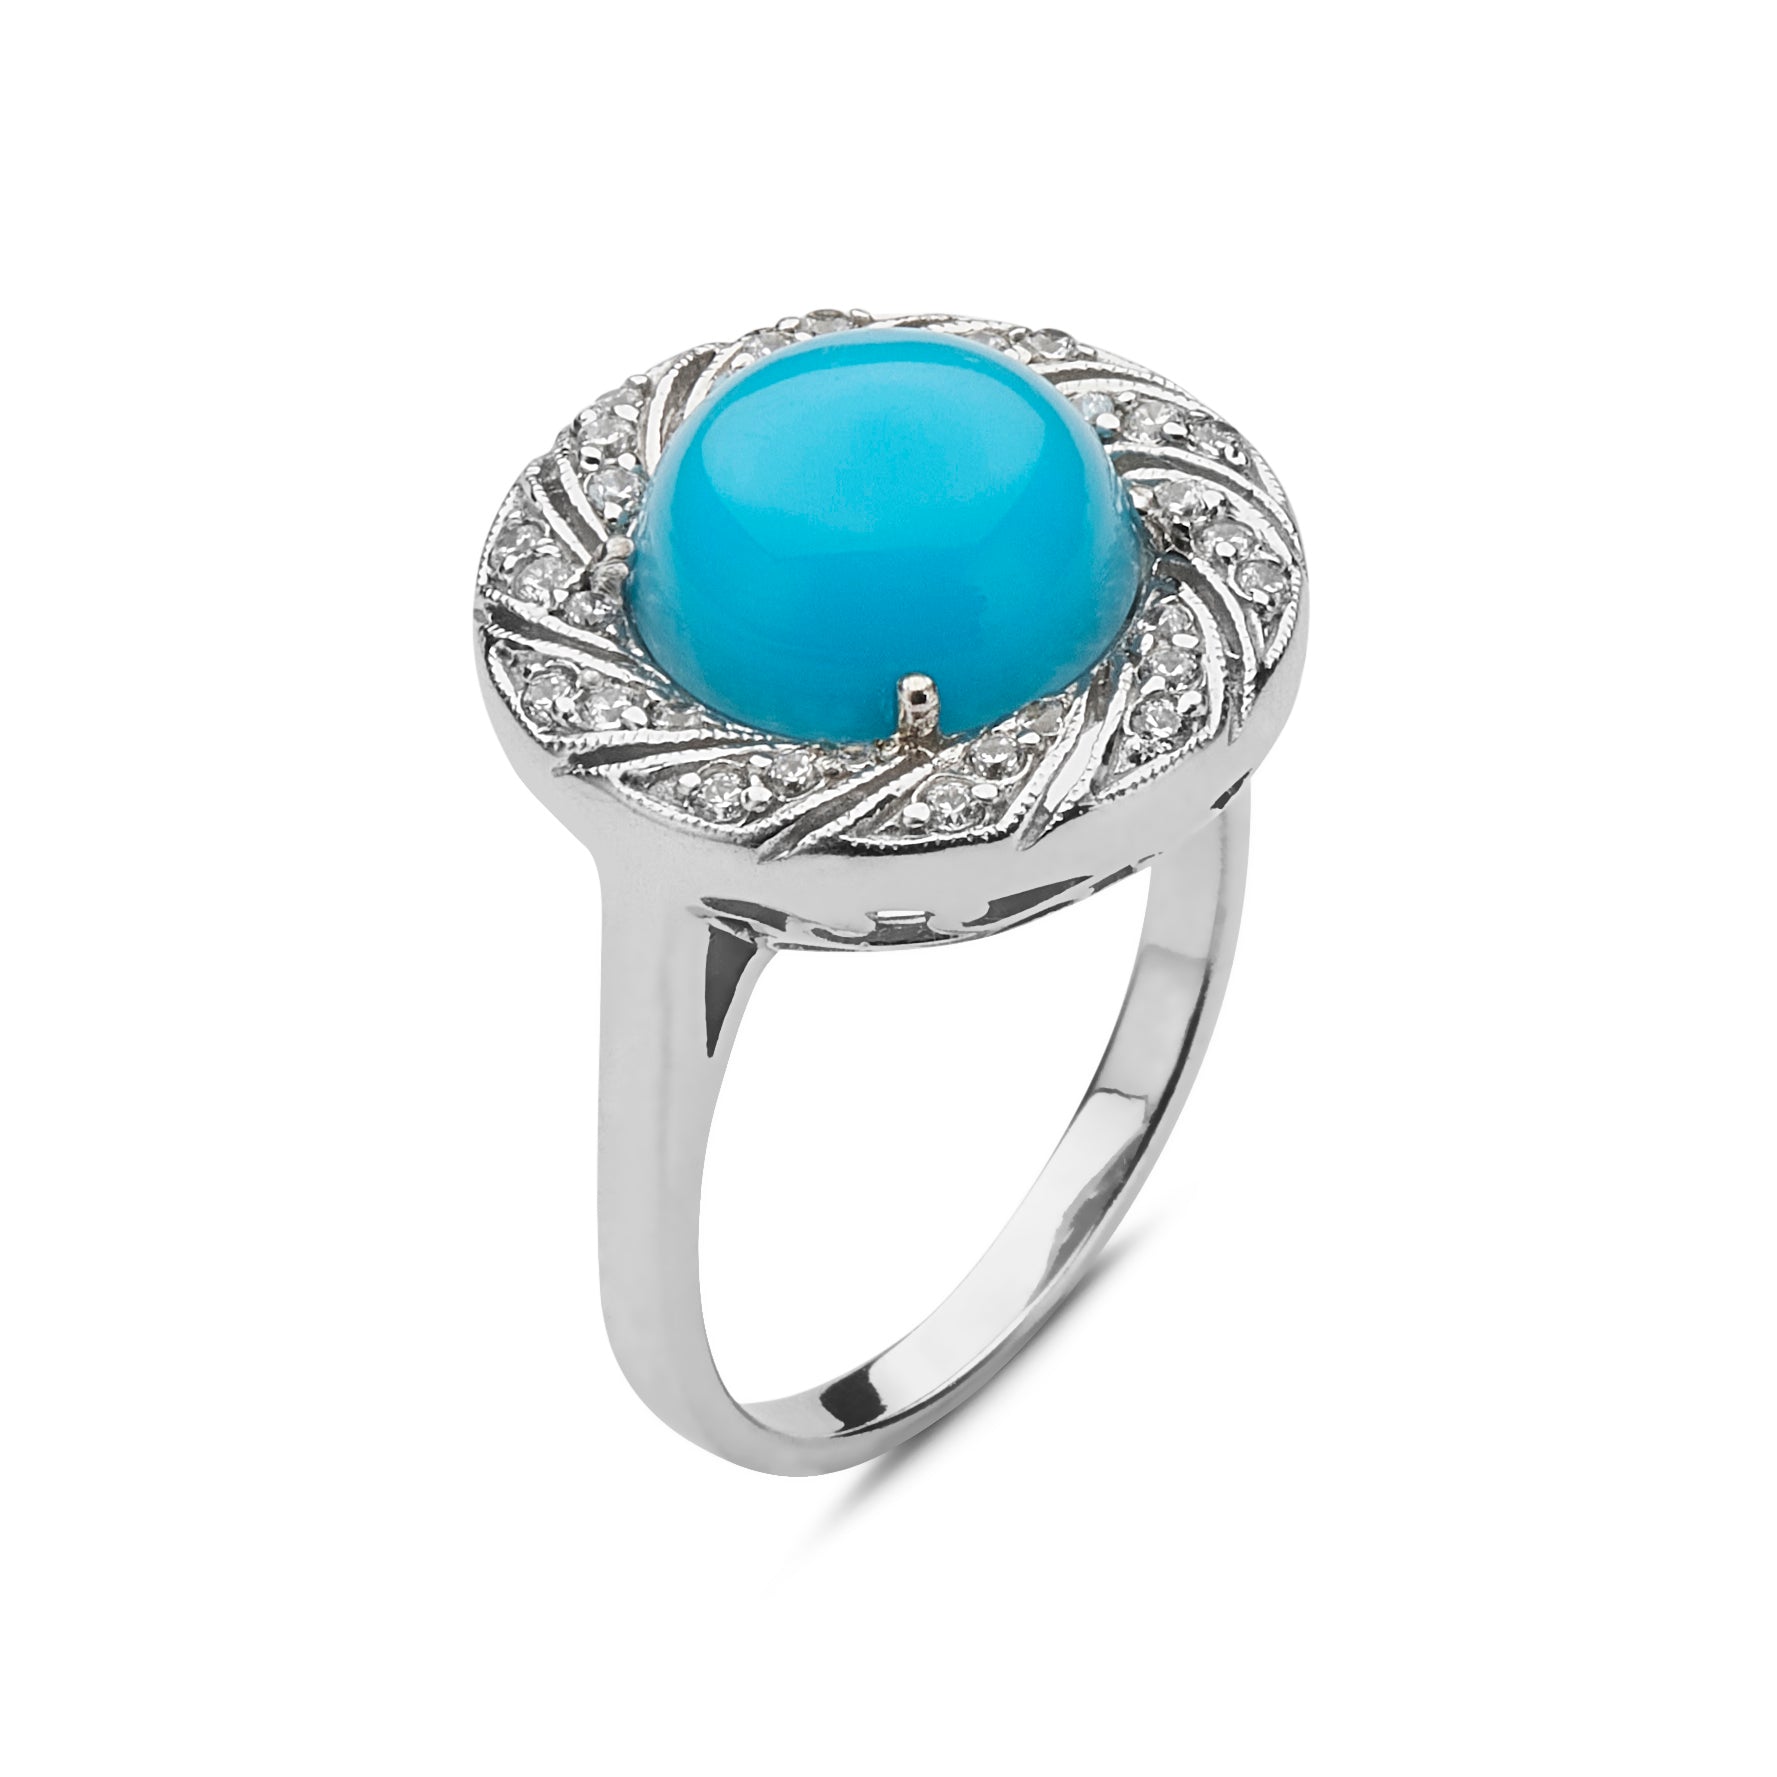 Turquoise Ring With Diamond Halo